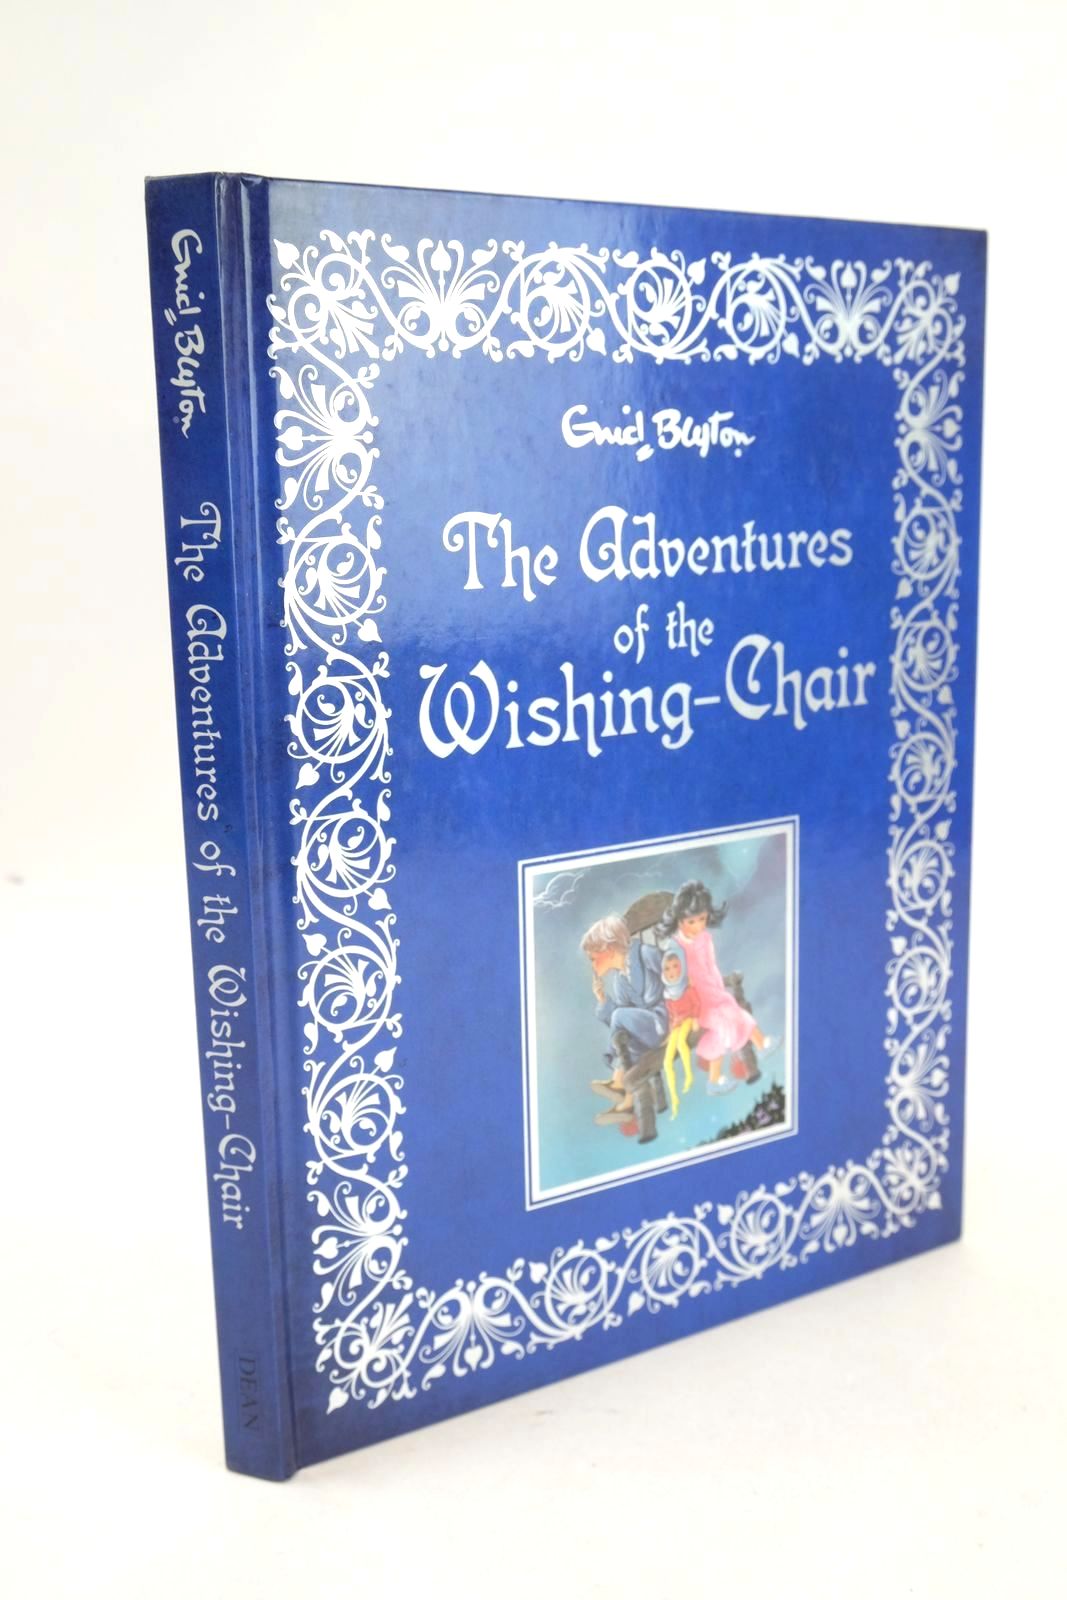 Photo of THE ADVENTURES OF THE WISHING-CHAIR written by Blyton, Enid illustrated by Hargreaves, Georgina published by Dean (STOCK CODE: 1325789)  for sale by Stella & Rose's Books